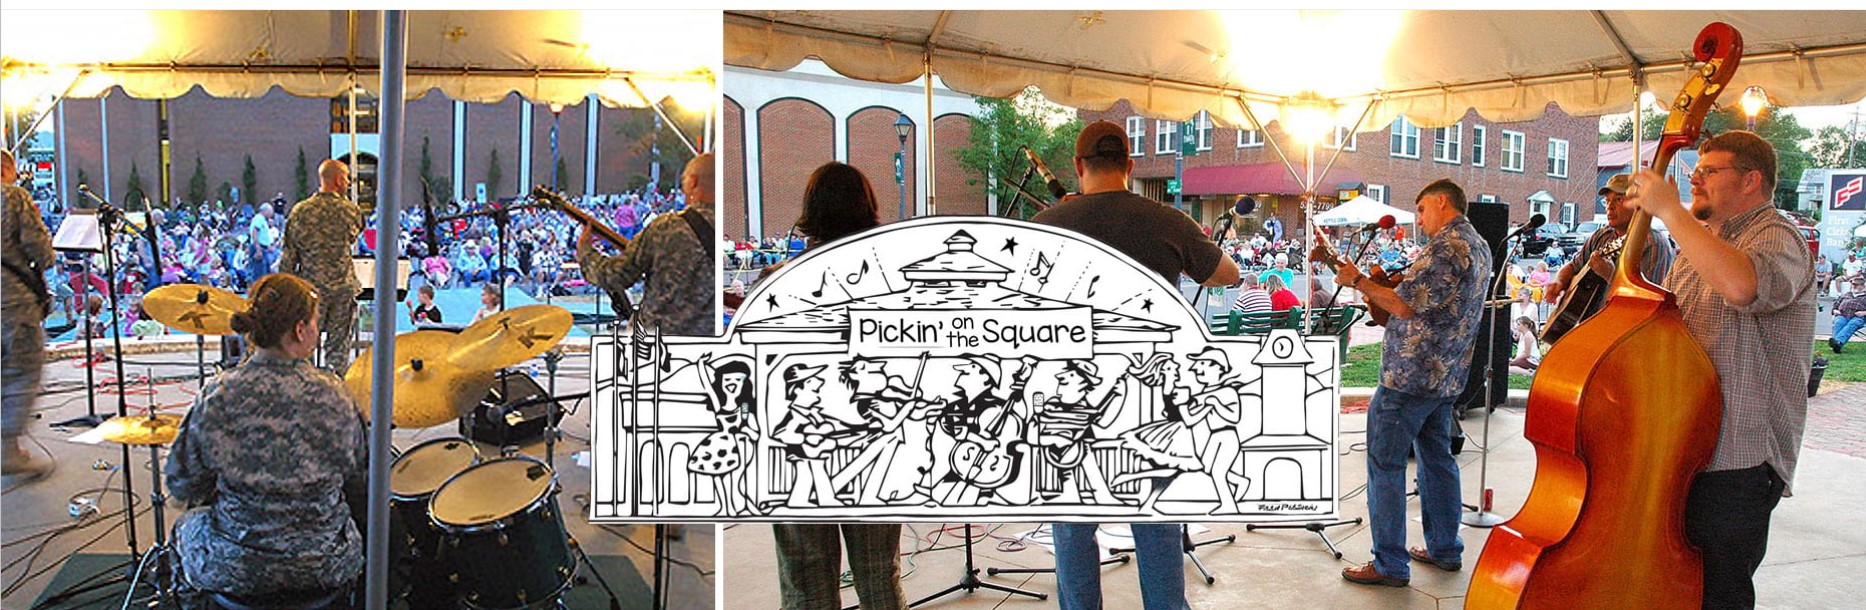 Family and Friends at Pickin on the Square